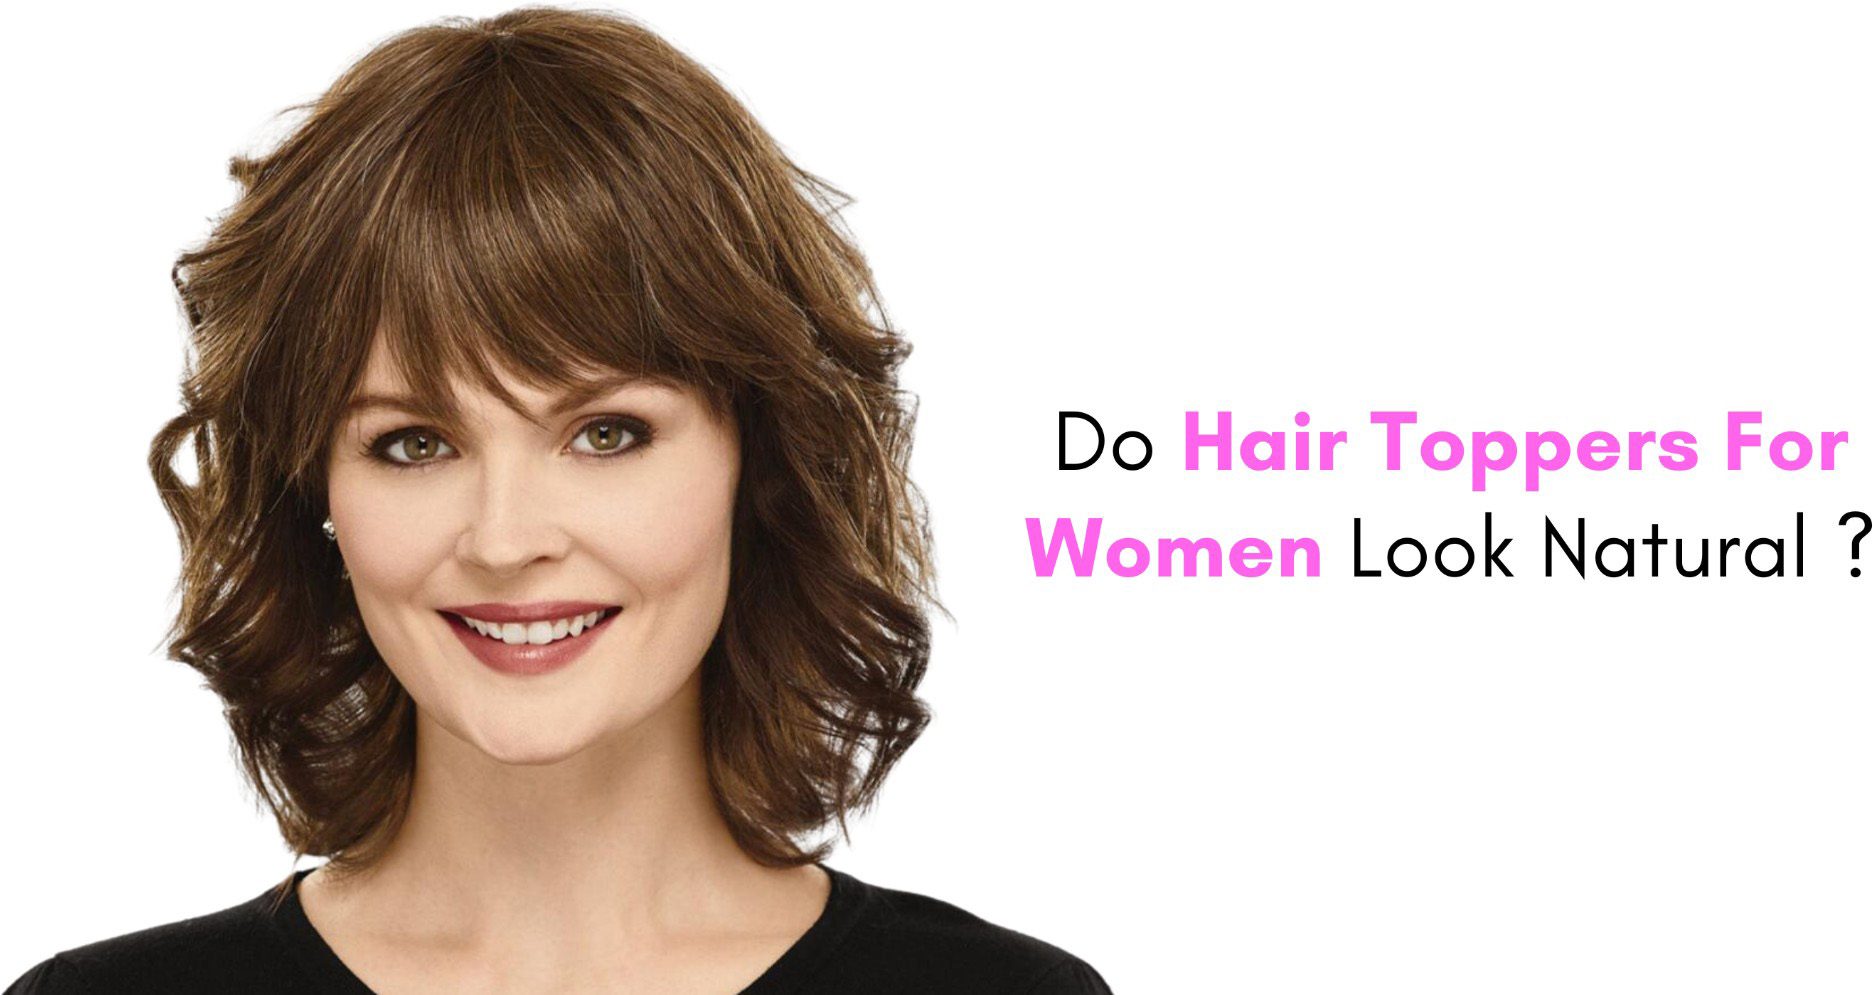 Do Hair Toppers For Women Look Natural?